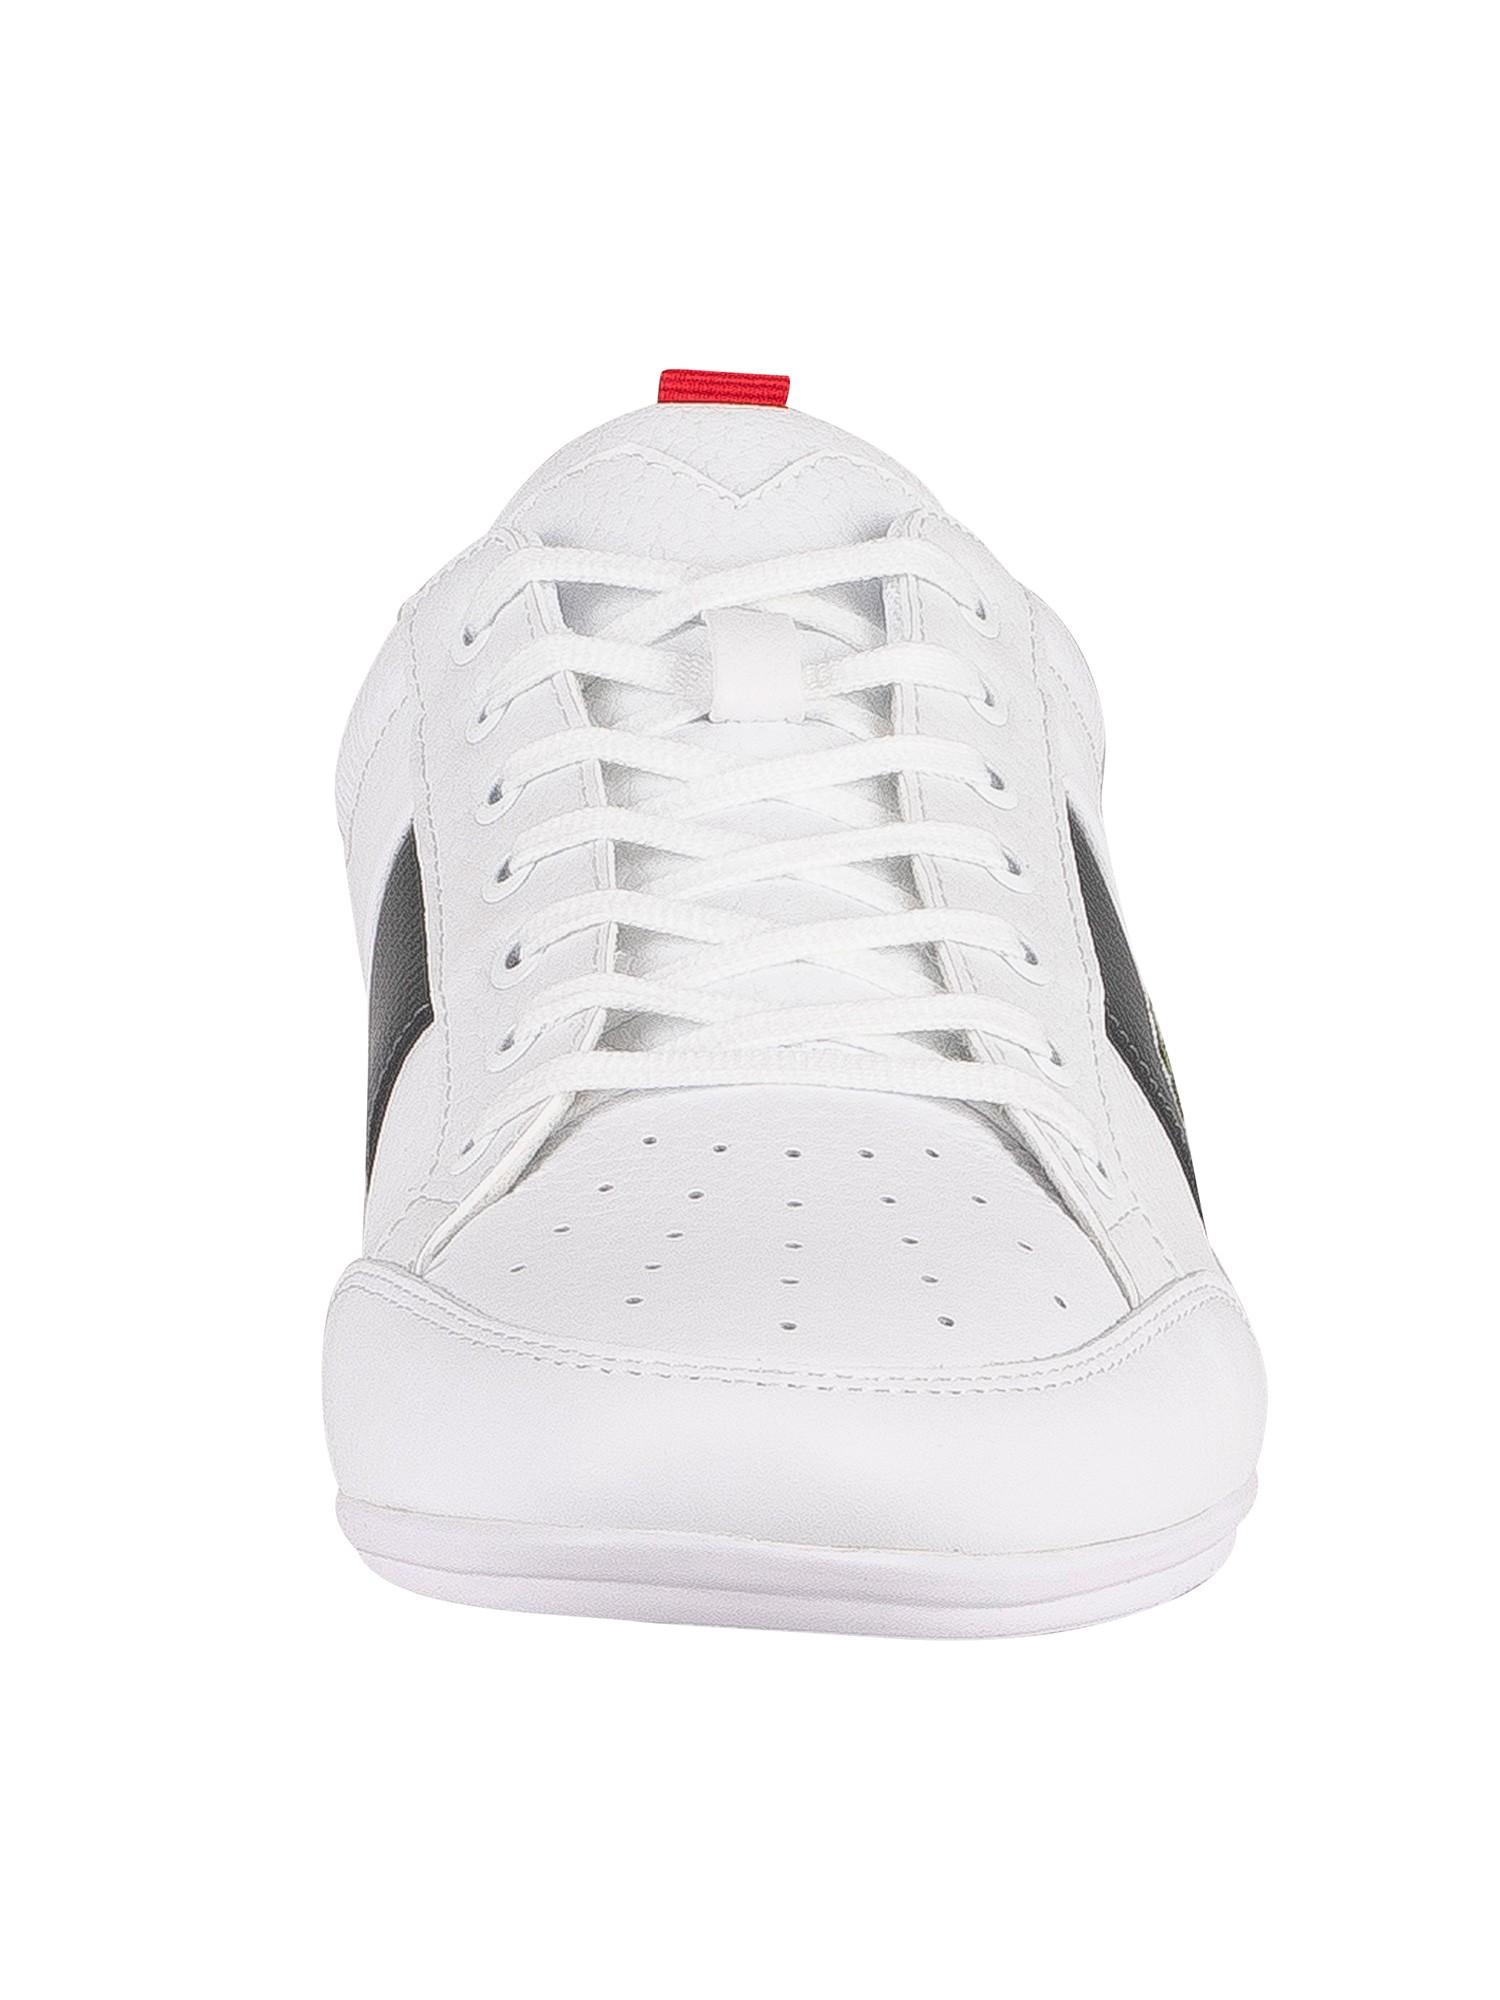 Lacoste Chaymon 0721 1 Cma Synthetic Leather Trainers in White for Men |  Lyst